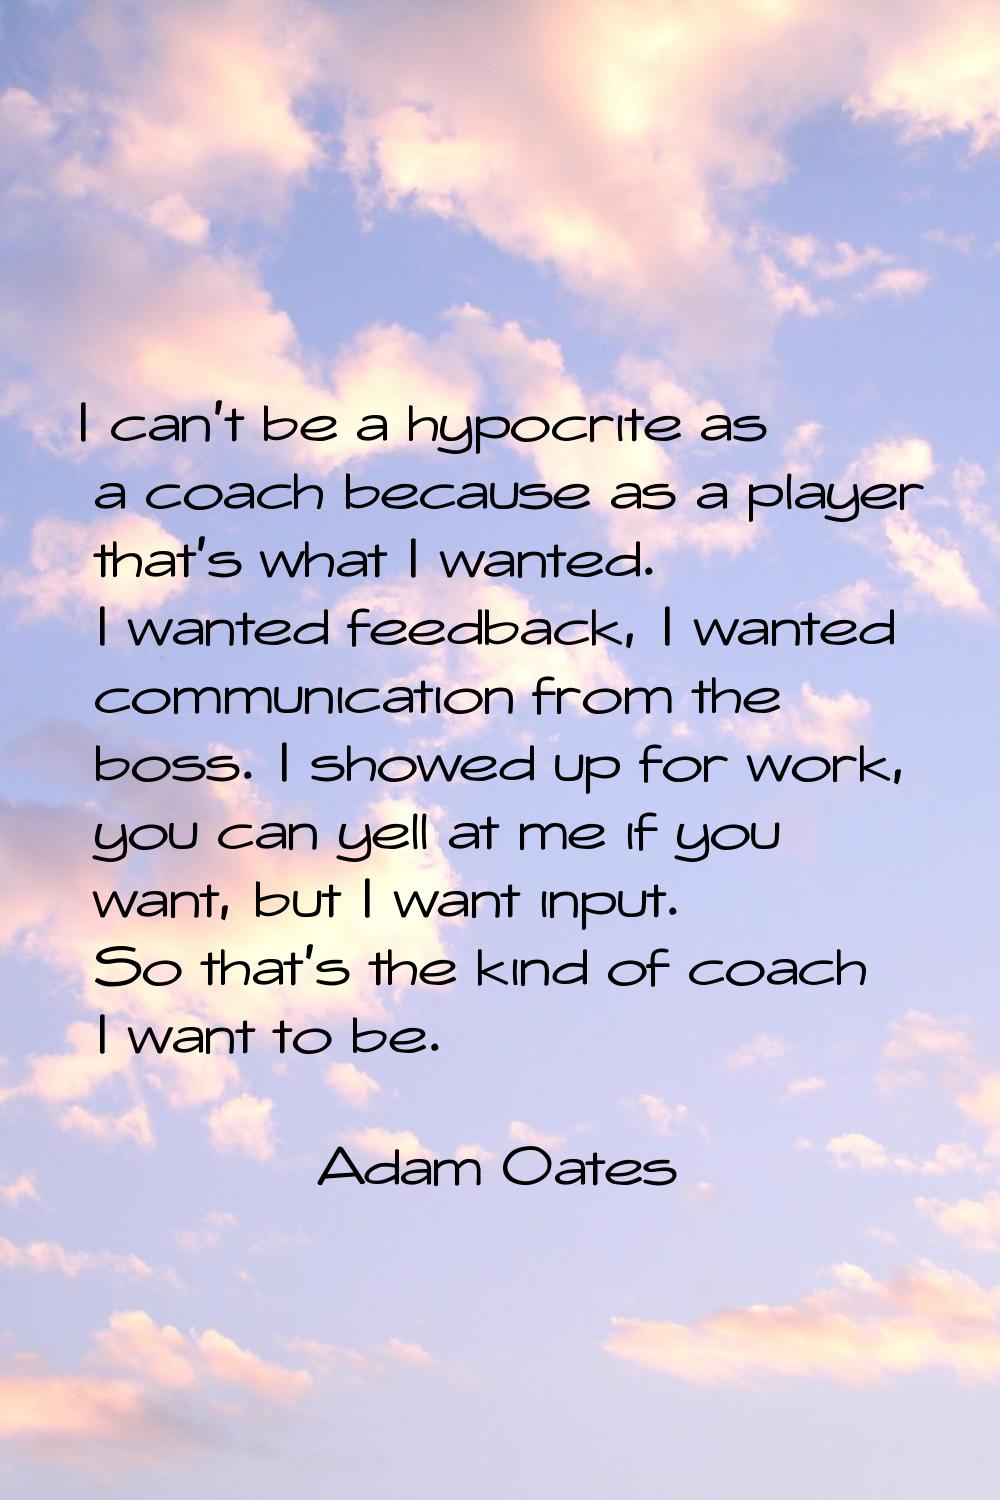 I can't be a hypocrite as a coach because as a player that's what I wanted. I wanted feedback, I wa